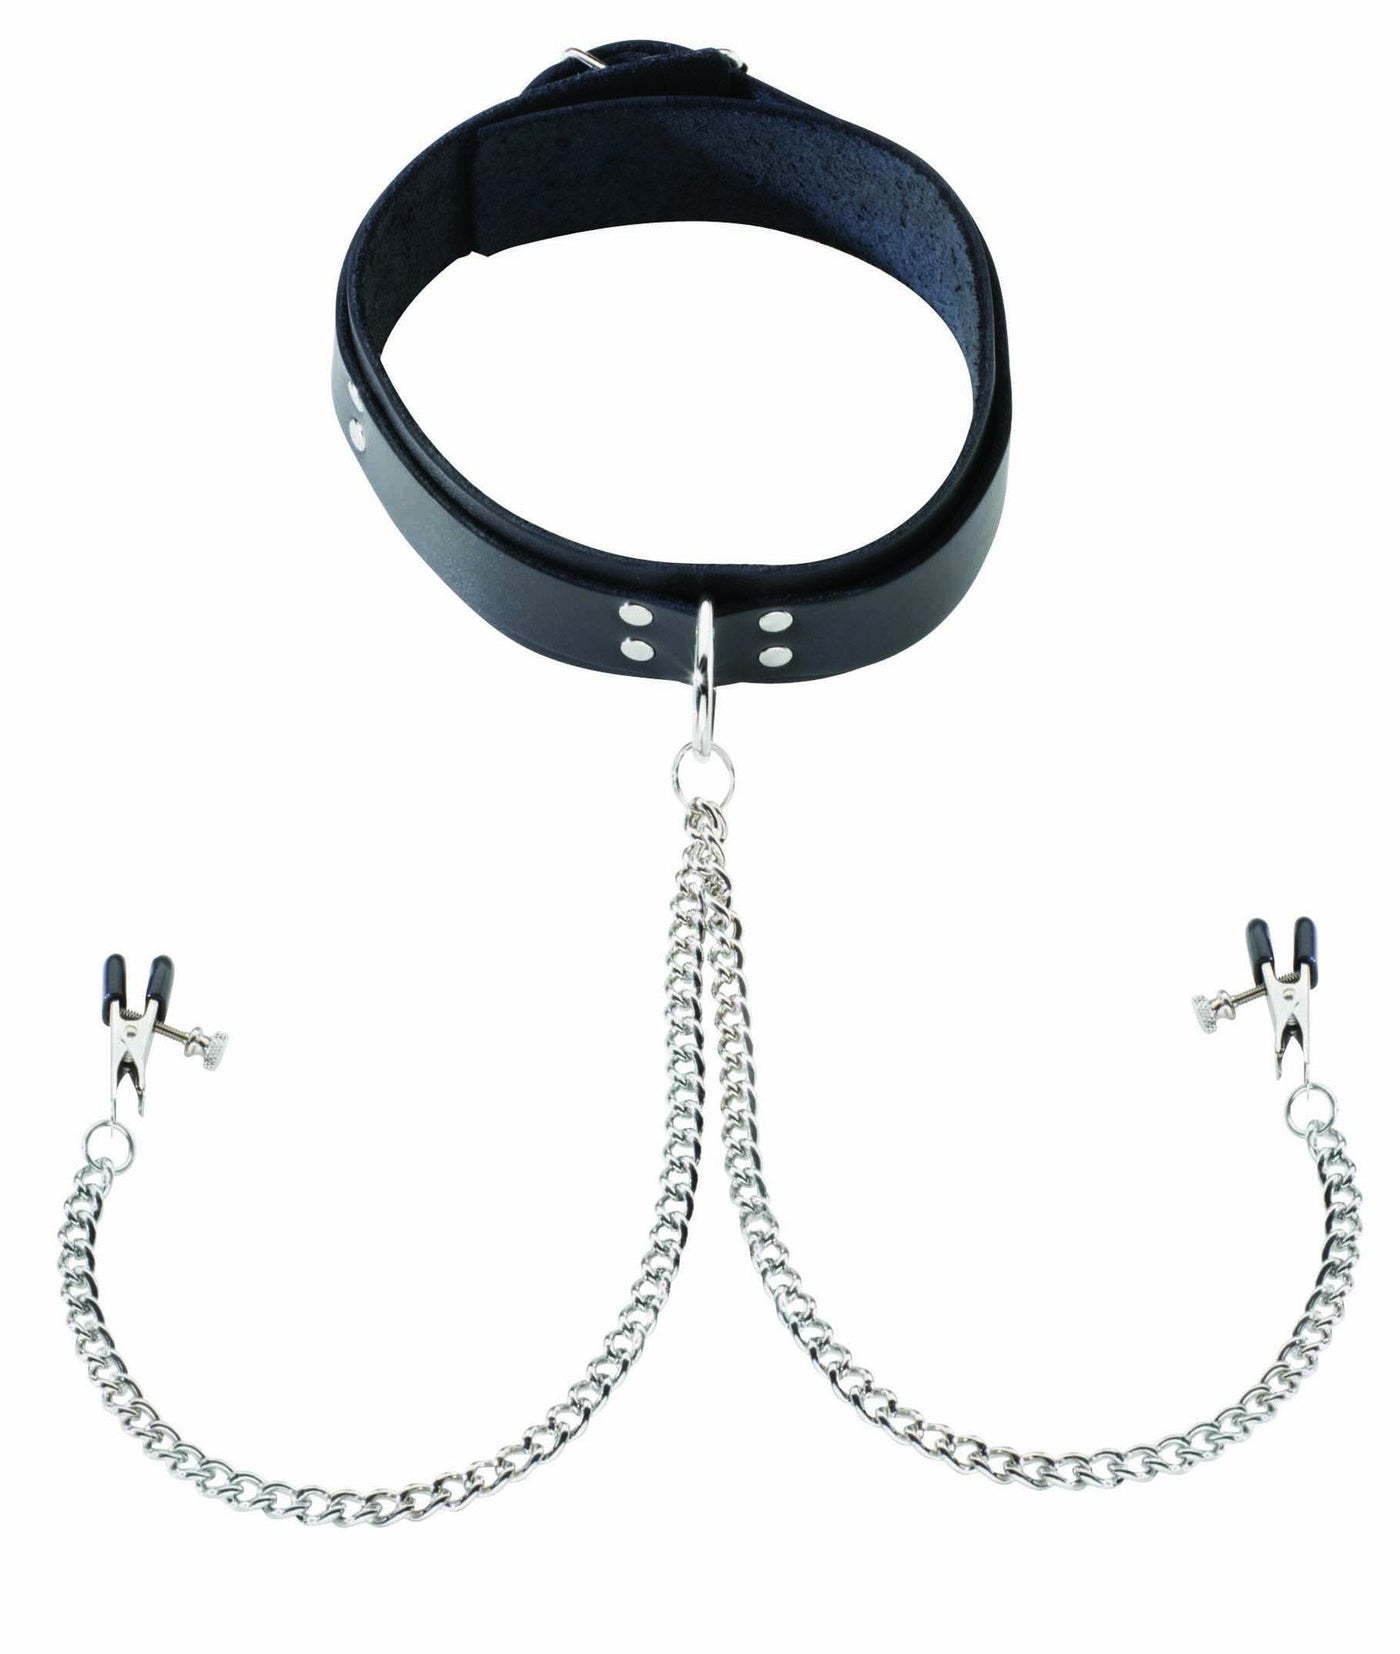 1.5" Inch Black Leather Collar With Nipple Clamps - Hamilton Park Electronics